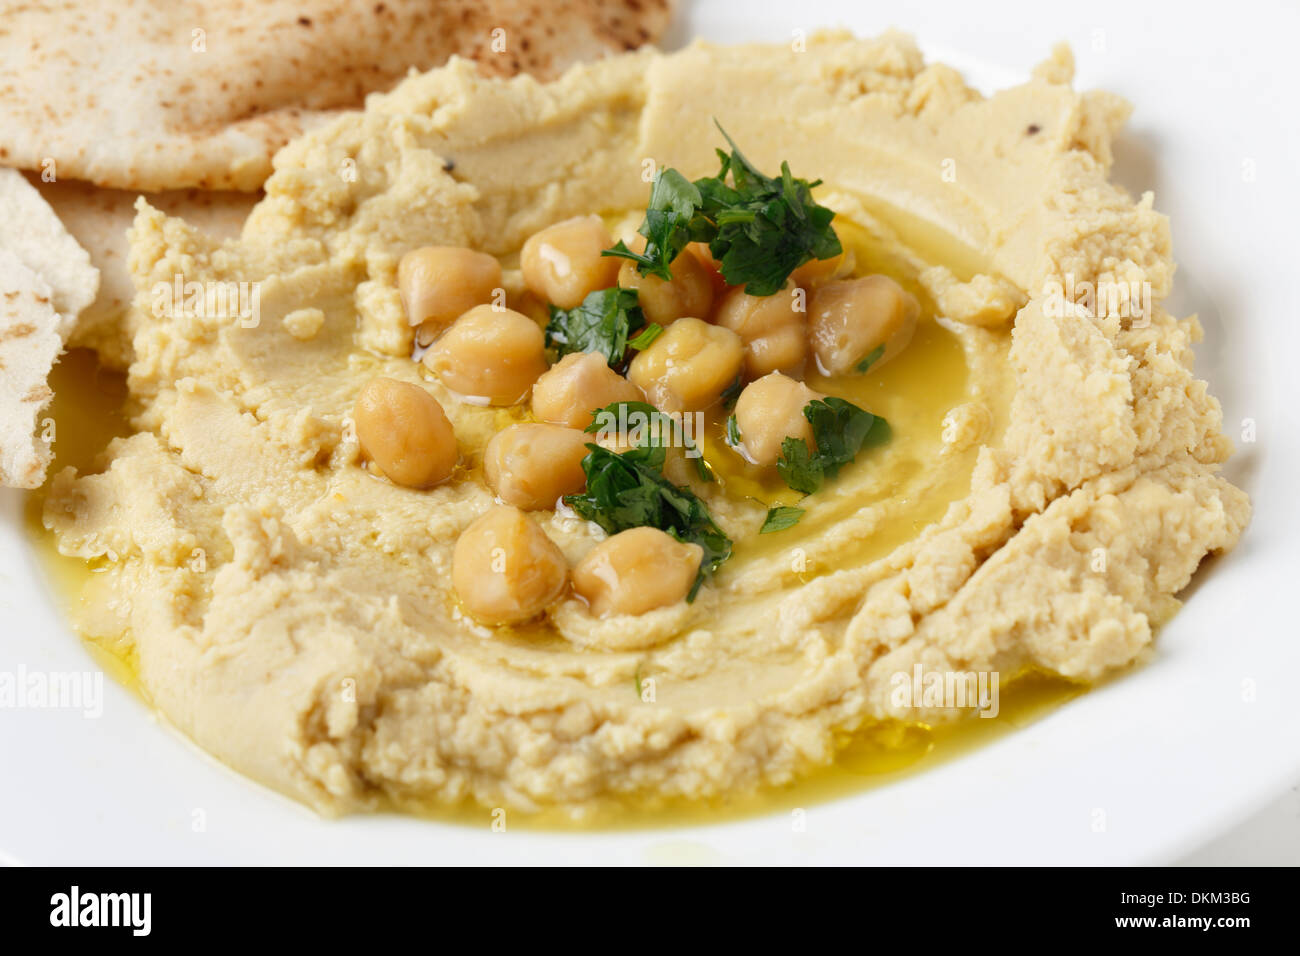 Arab masbacha, hummus dip served with whole chickpeas and a chilli and lemon flavoured sauce and unleavened bread. Stock Photo